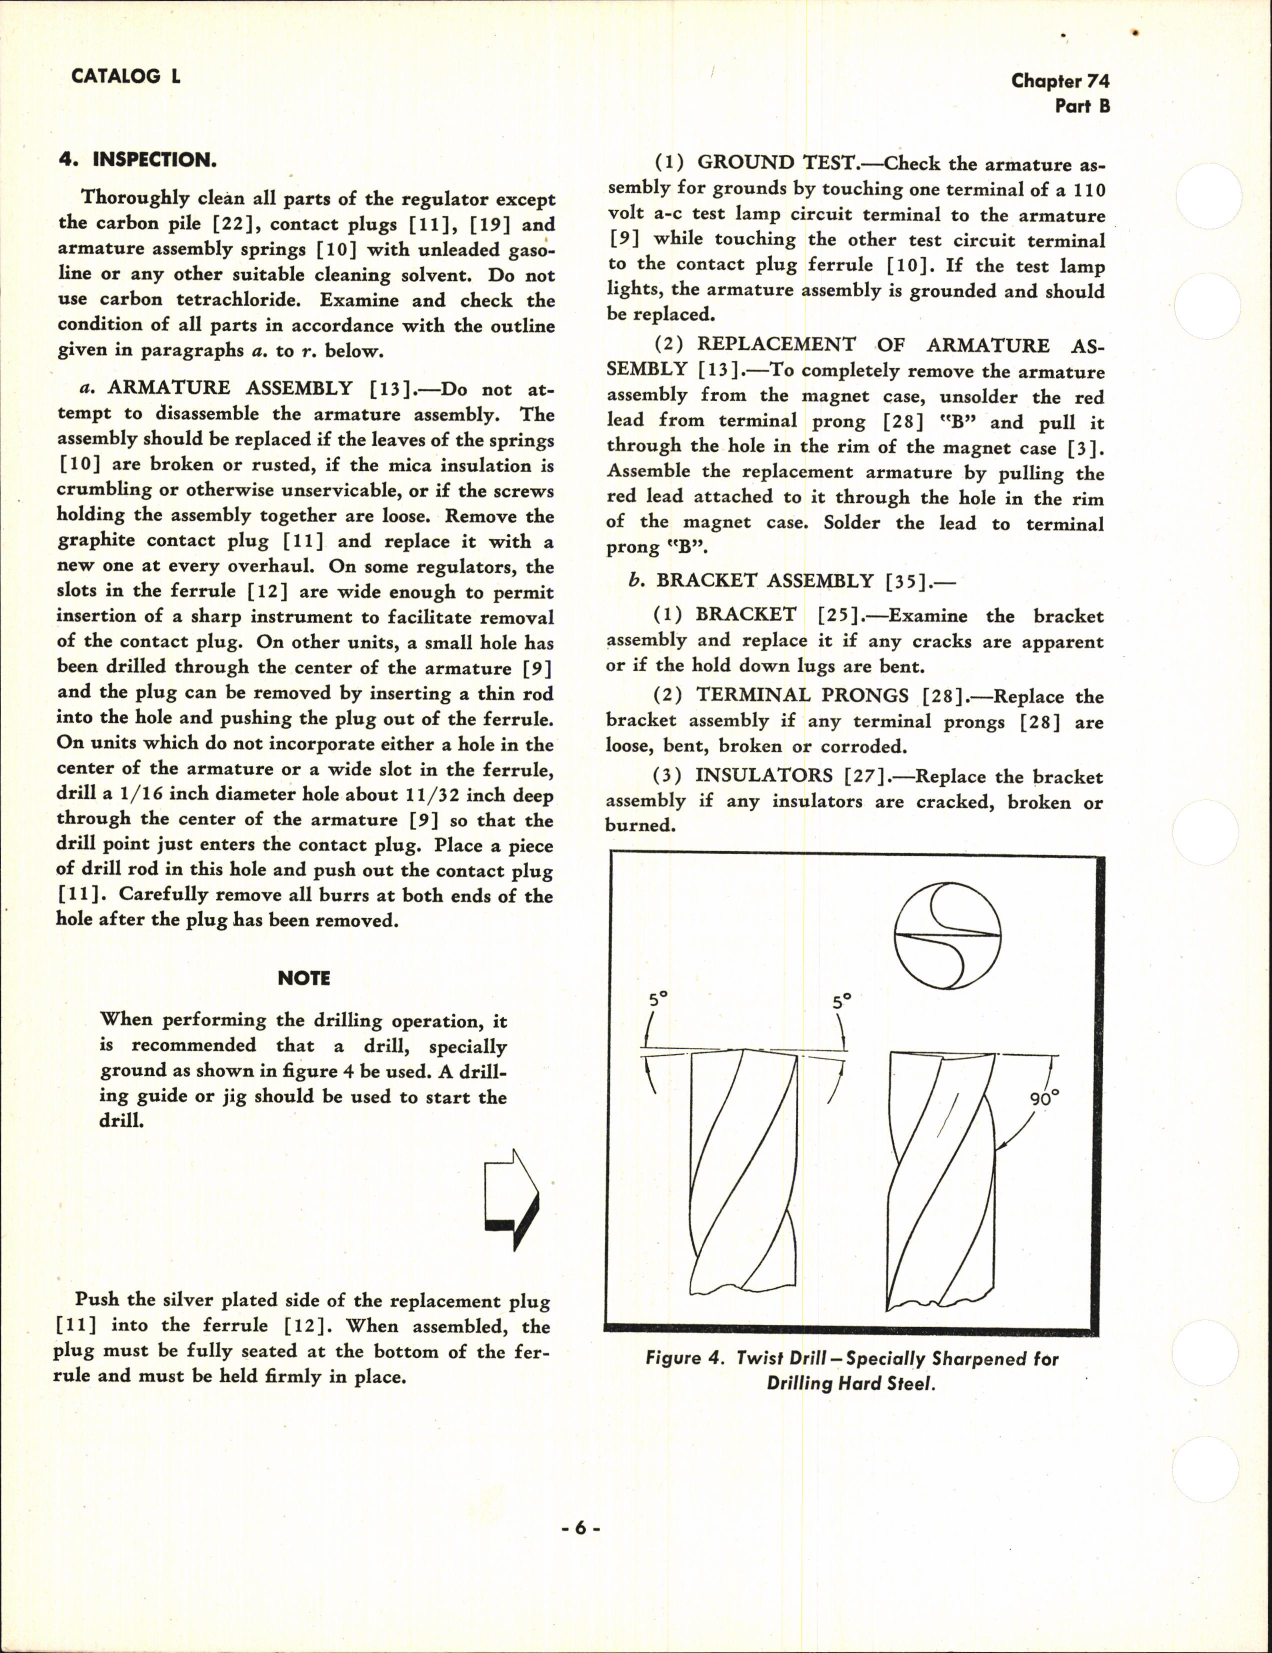 Sample page 6 from AirCorps Library document: Overhaul Instructions for Carbon Pile Voltage Regulator Types 1042 and 1337